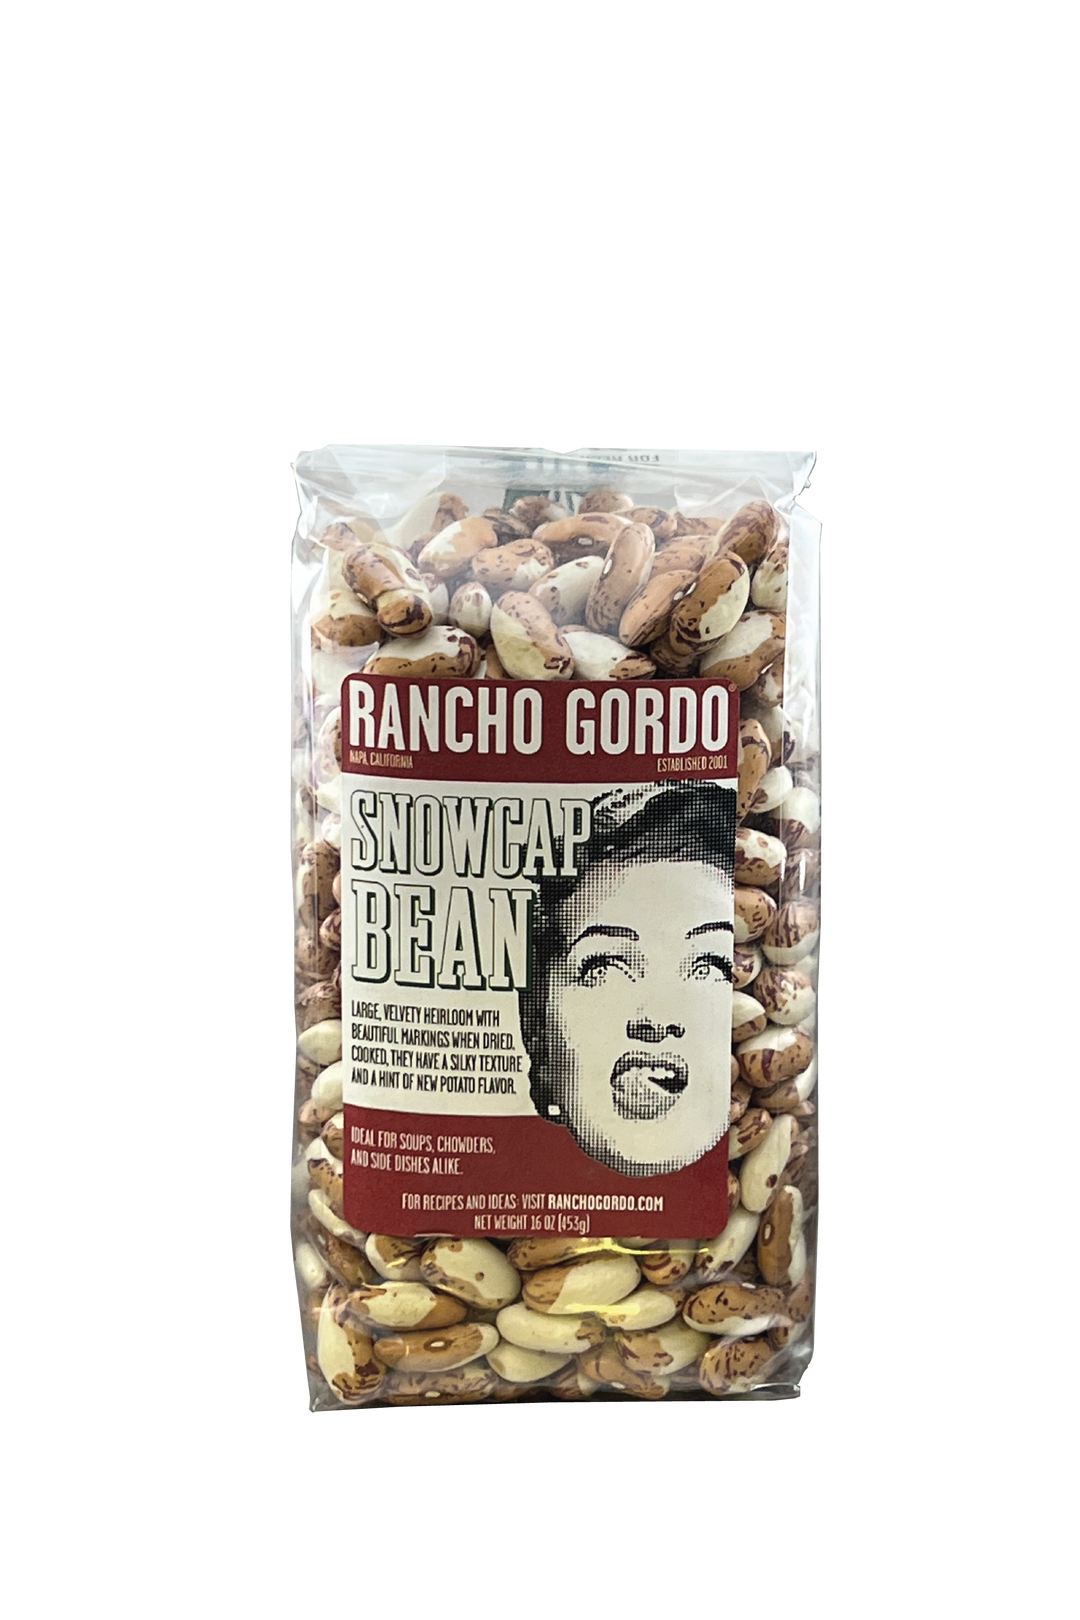 A One Pound Bag Of Rancho Gordo Snowcap beans on a white background. Red and white label with an image of the face of a woman licking her upper lip. Additional text on bag reads: Large, velvety heirloom with beautiful markings when dried. Cooked, they have a silky texture and a hint of new potato flavor. Ideal for soups, chowders, and side dishes alike.